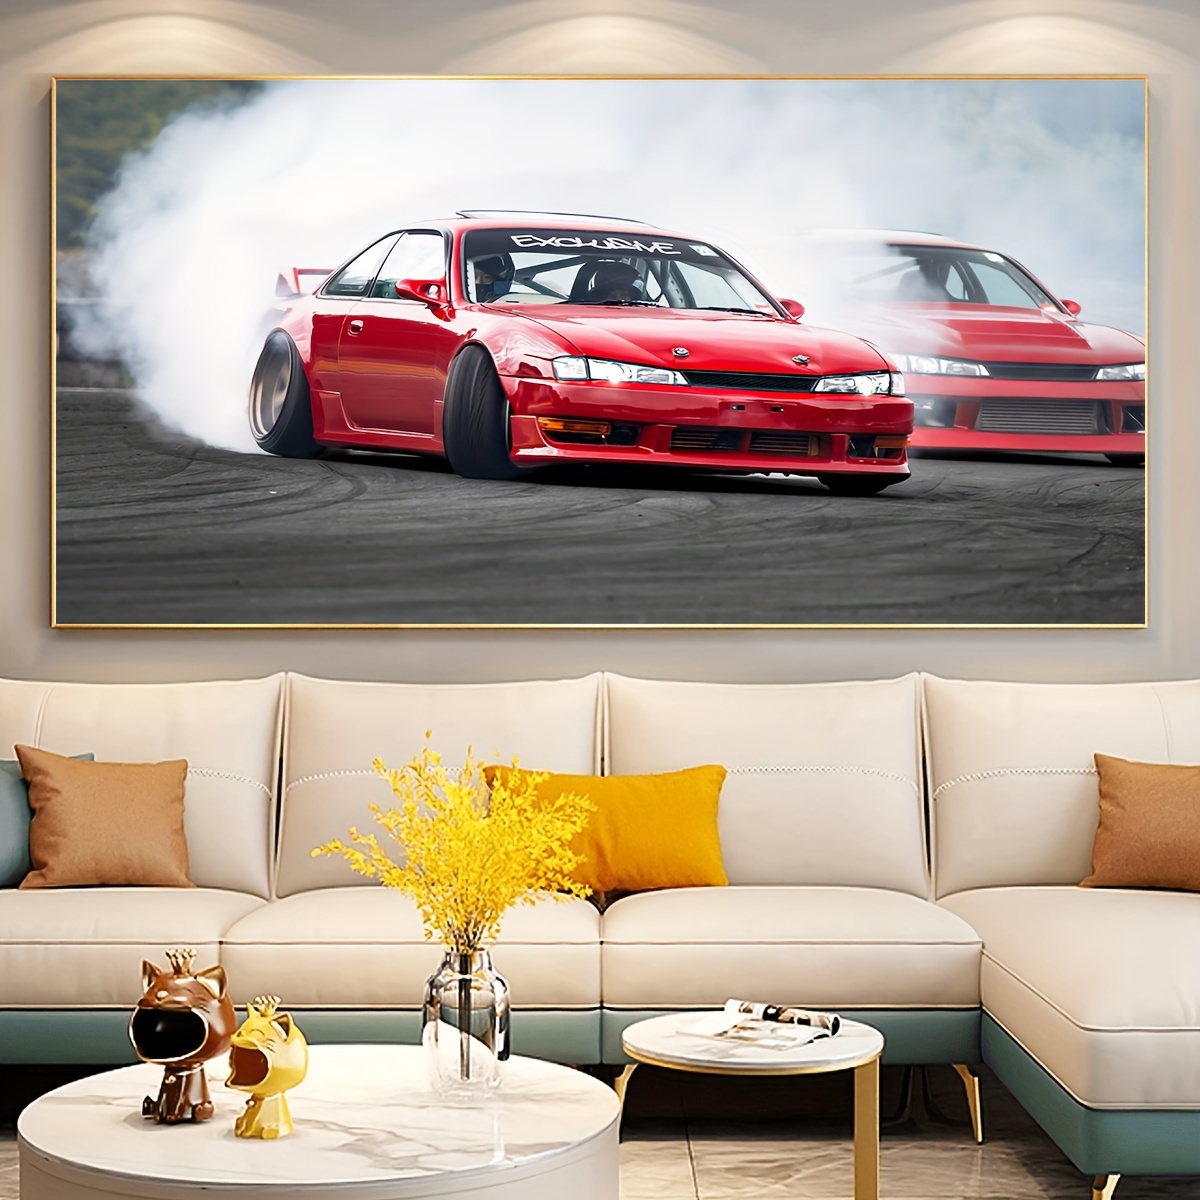 9pcs Póster Jdm Pósters Coches Jdm Hombres Arte Pared Coches - Temu Chile